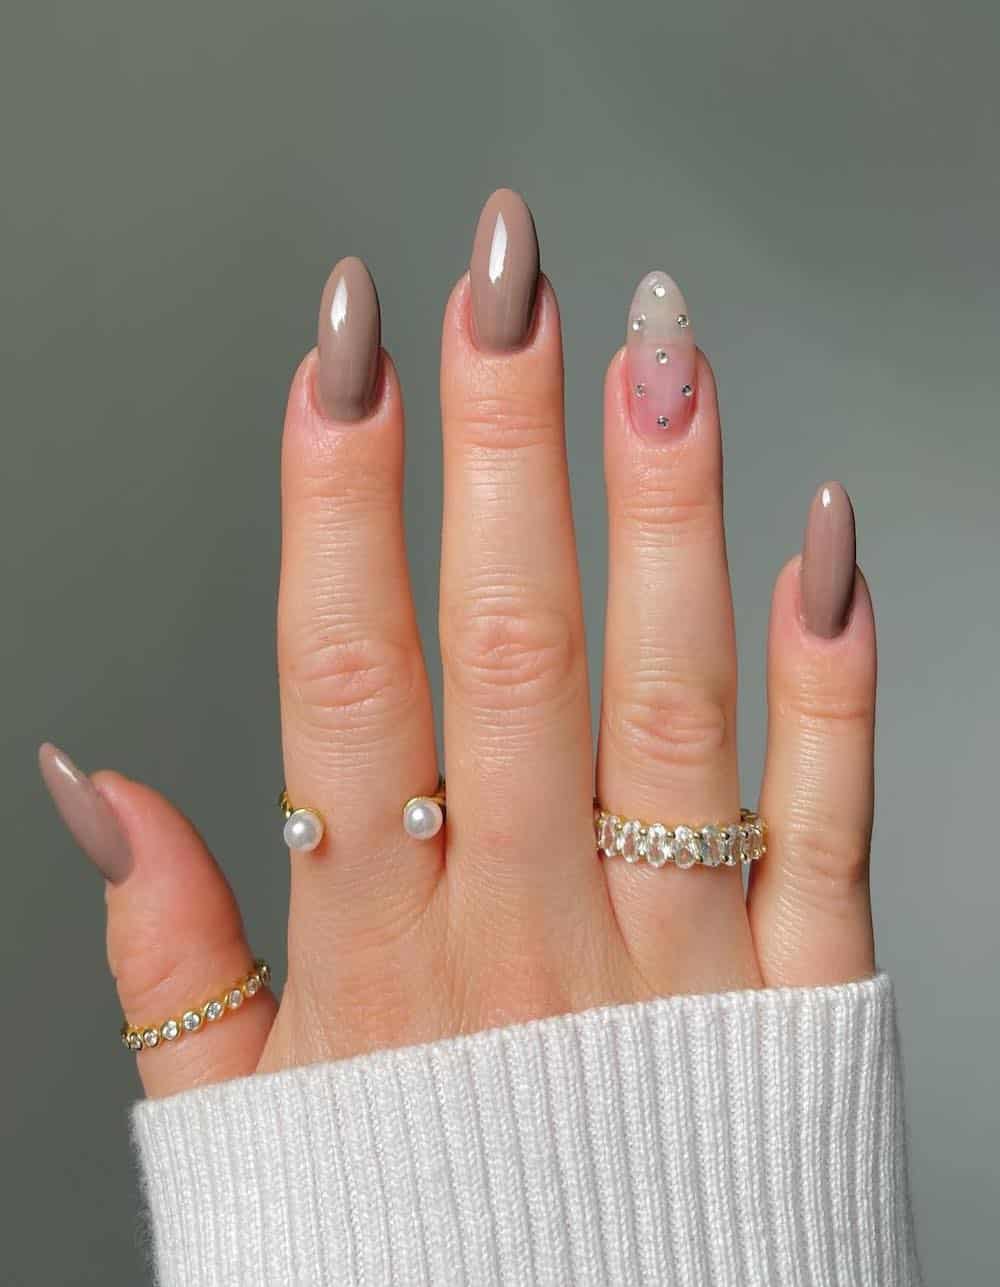 A hand with long almond nails painted a milk chocolate brown with a nude accent nail featuring gem details